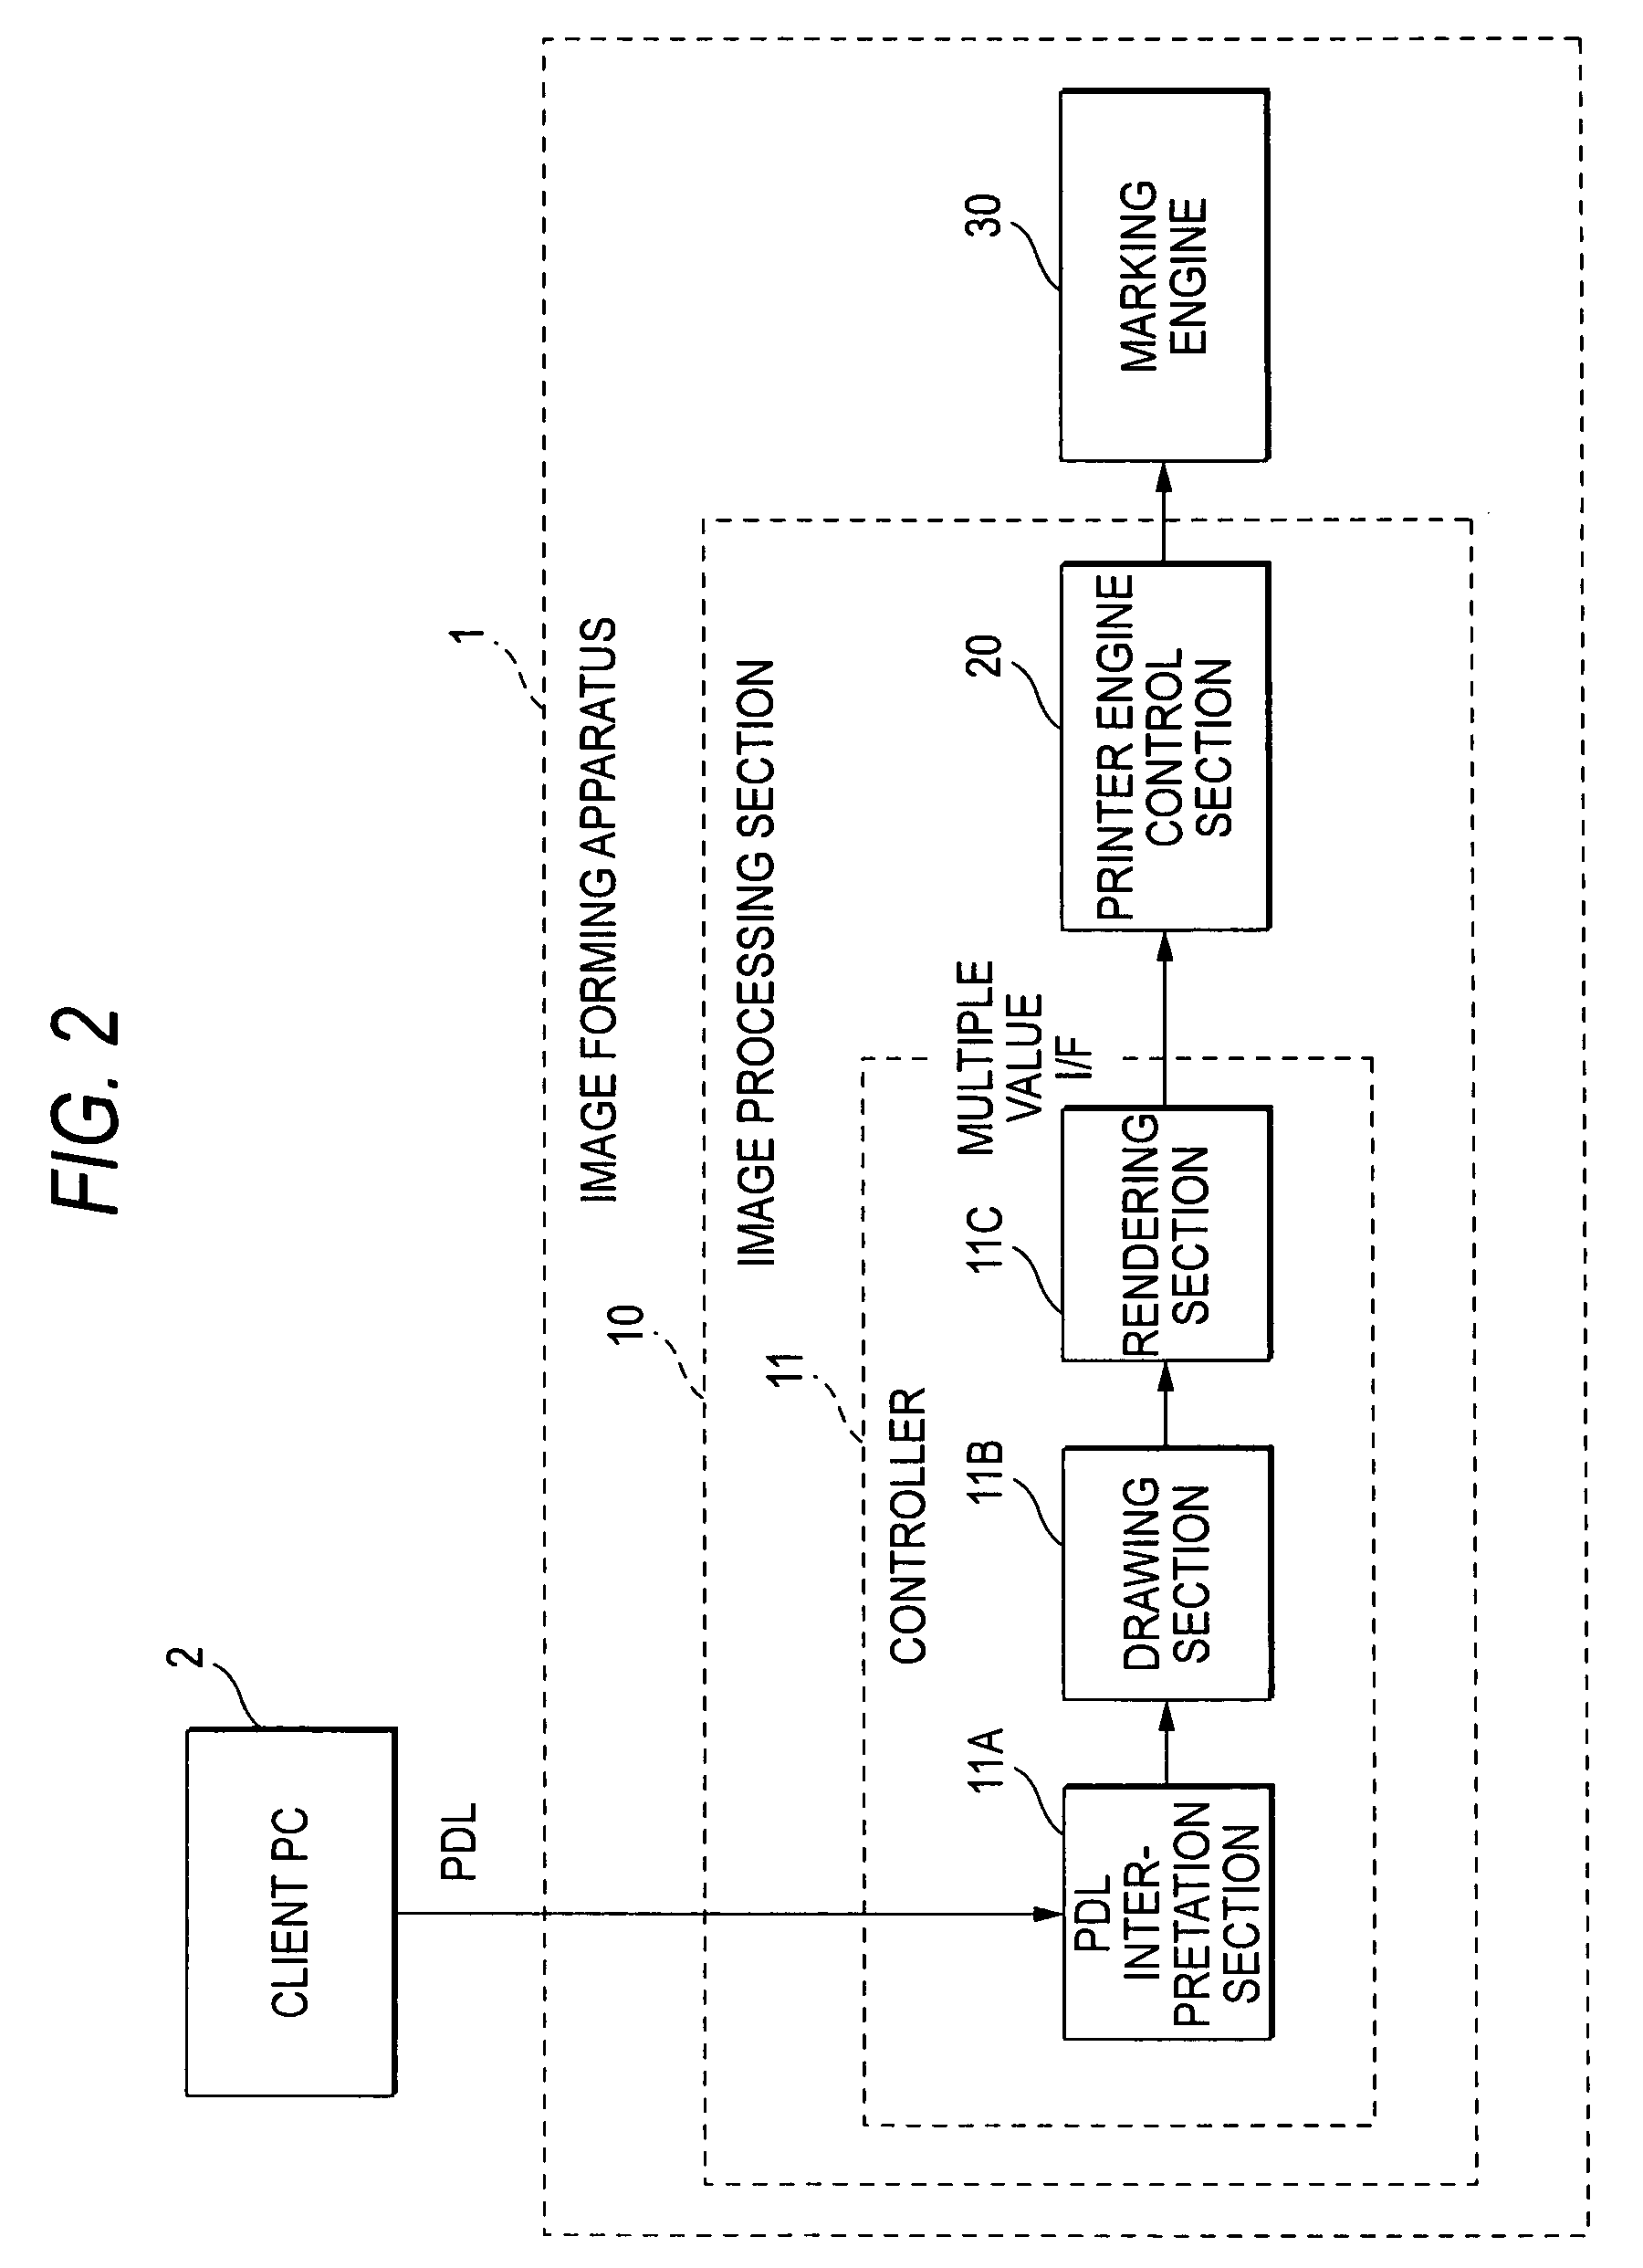 Image processing apparatus, image forming apparatus, and image processing method for edge detection processing and determination